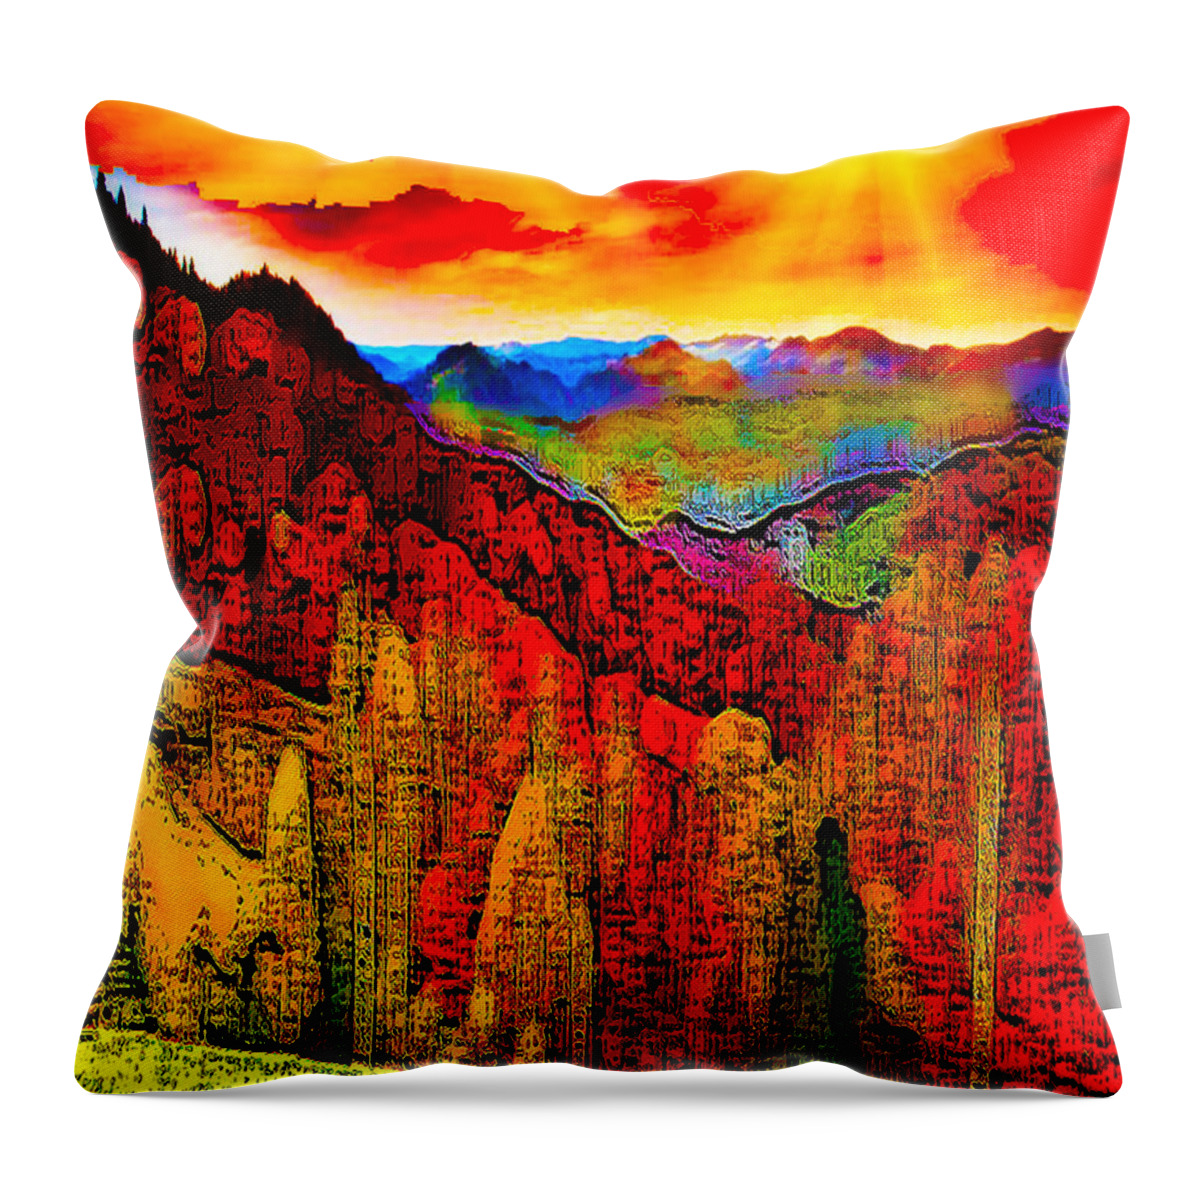 Abstract Landscape Throw Pillow featuring the digital art Abstract Scenic 3a by Bruce IORIO